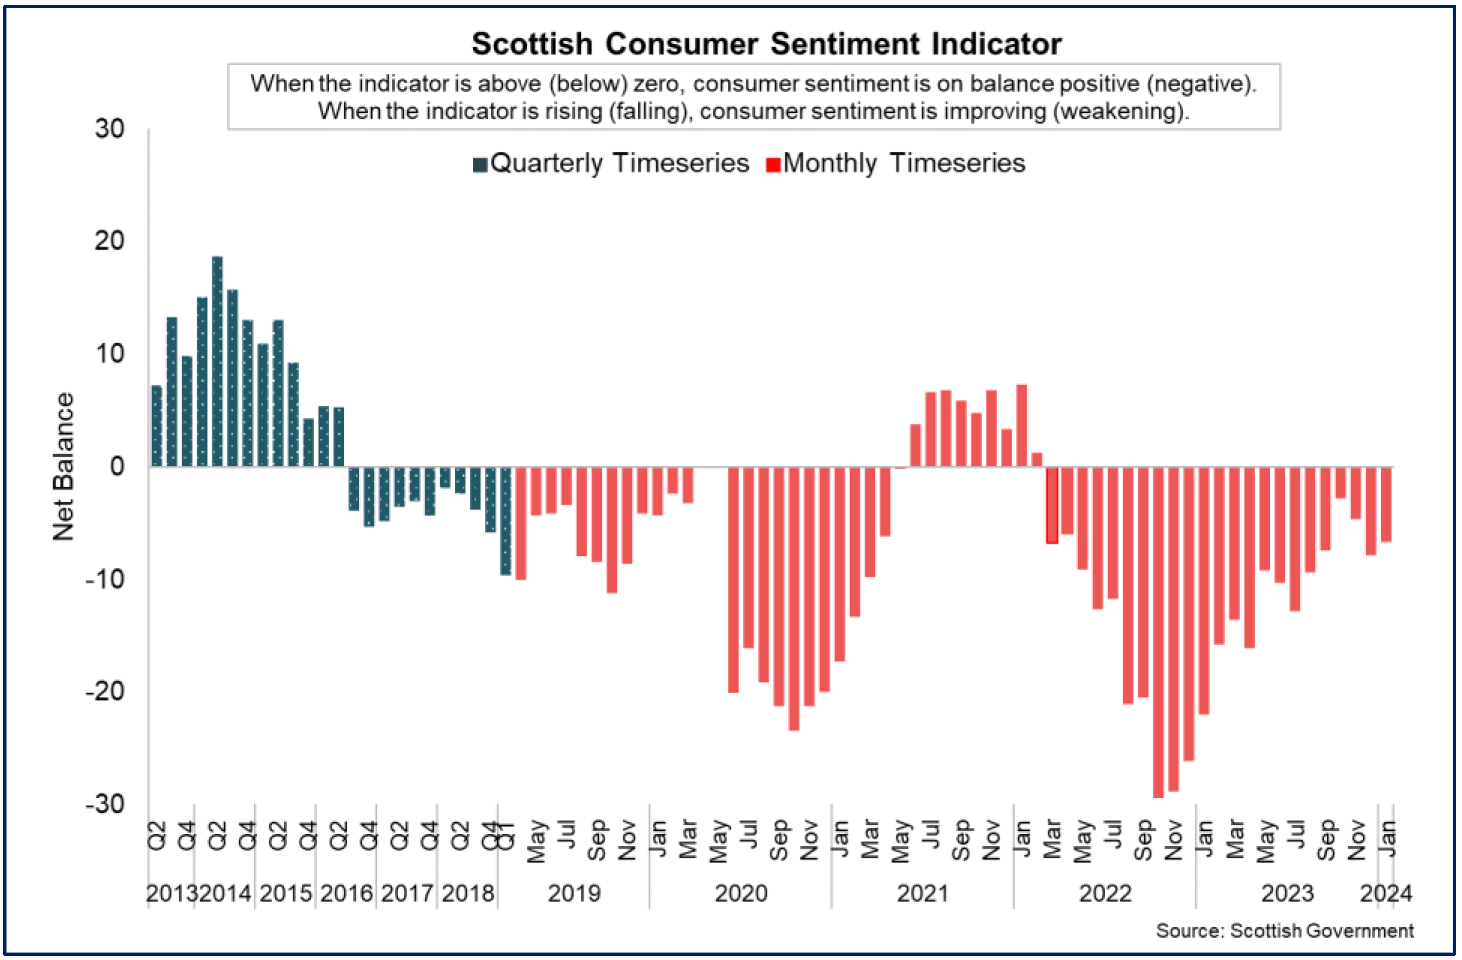 consumer sentiment in Scotland strengthened in January 2024 however remained negative